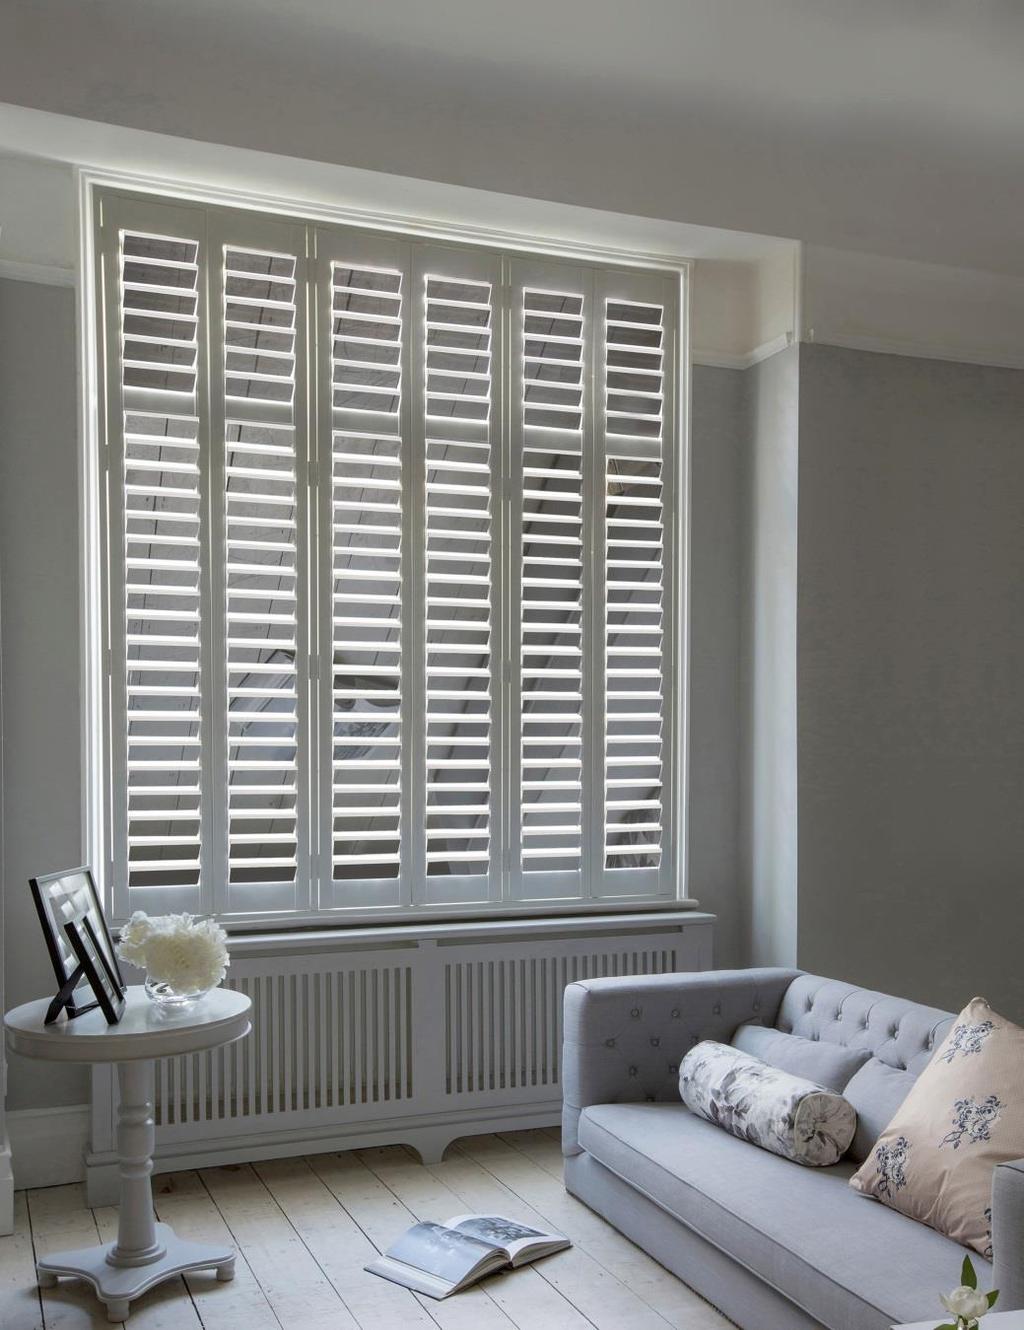 Mirrored Shutters Mirrors are fantastic at brightening up a room by reflecting light to add depth and vibrancy, so Luxaflex mirrored shutters are ideal for rooms that need a little lift, style and